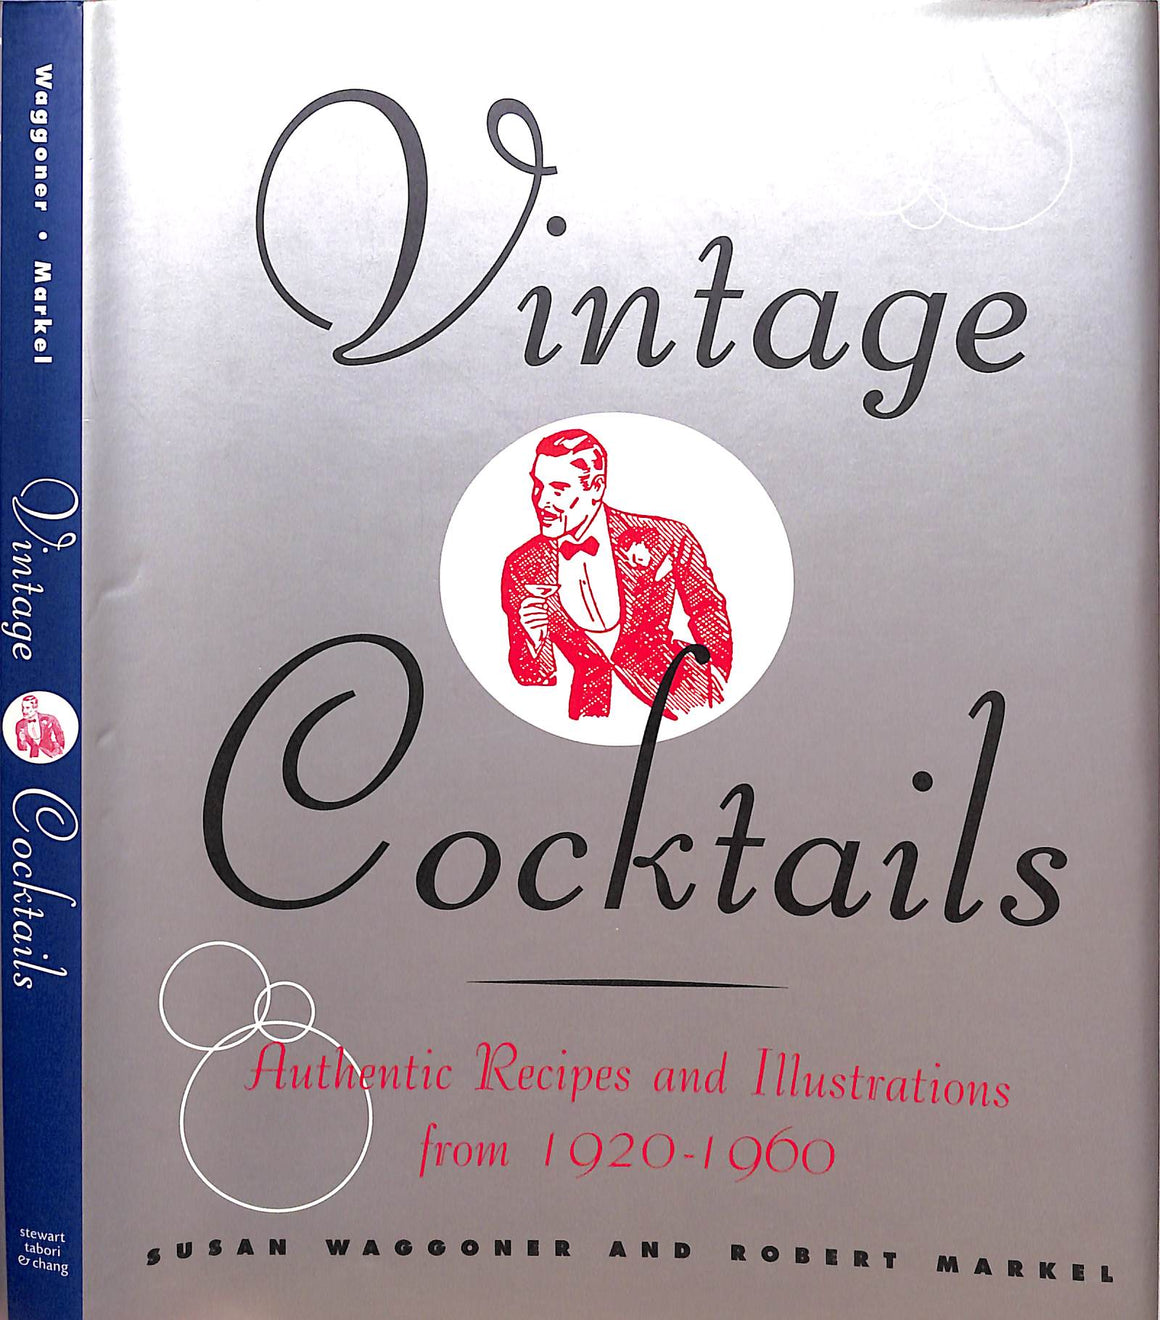 "Vintage Cocktails Authentic Recipes And Illustrations From 1920-1960" 1999 WAGGONER, Susan, MARKEL, Robert (SOLD)